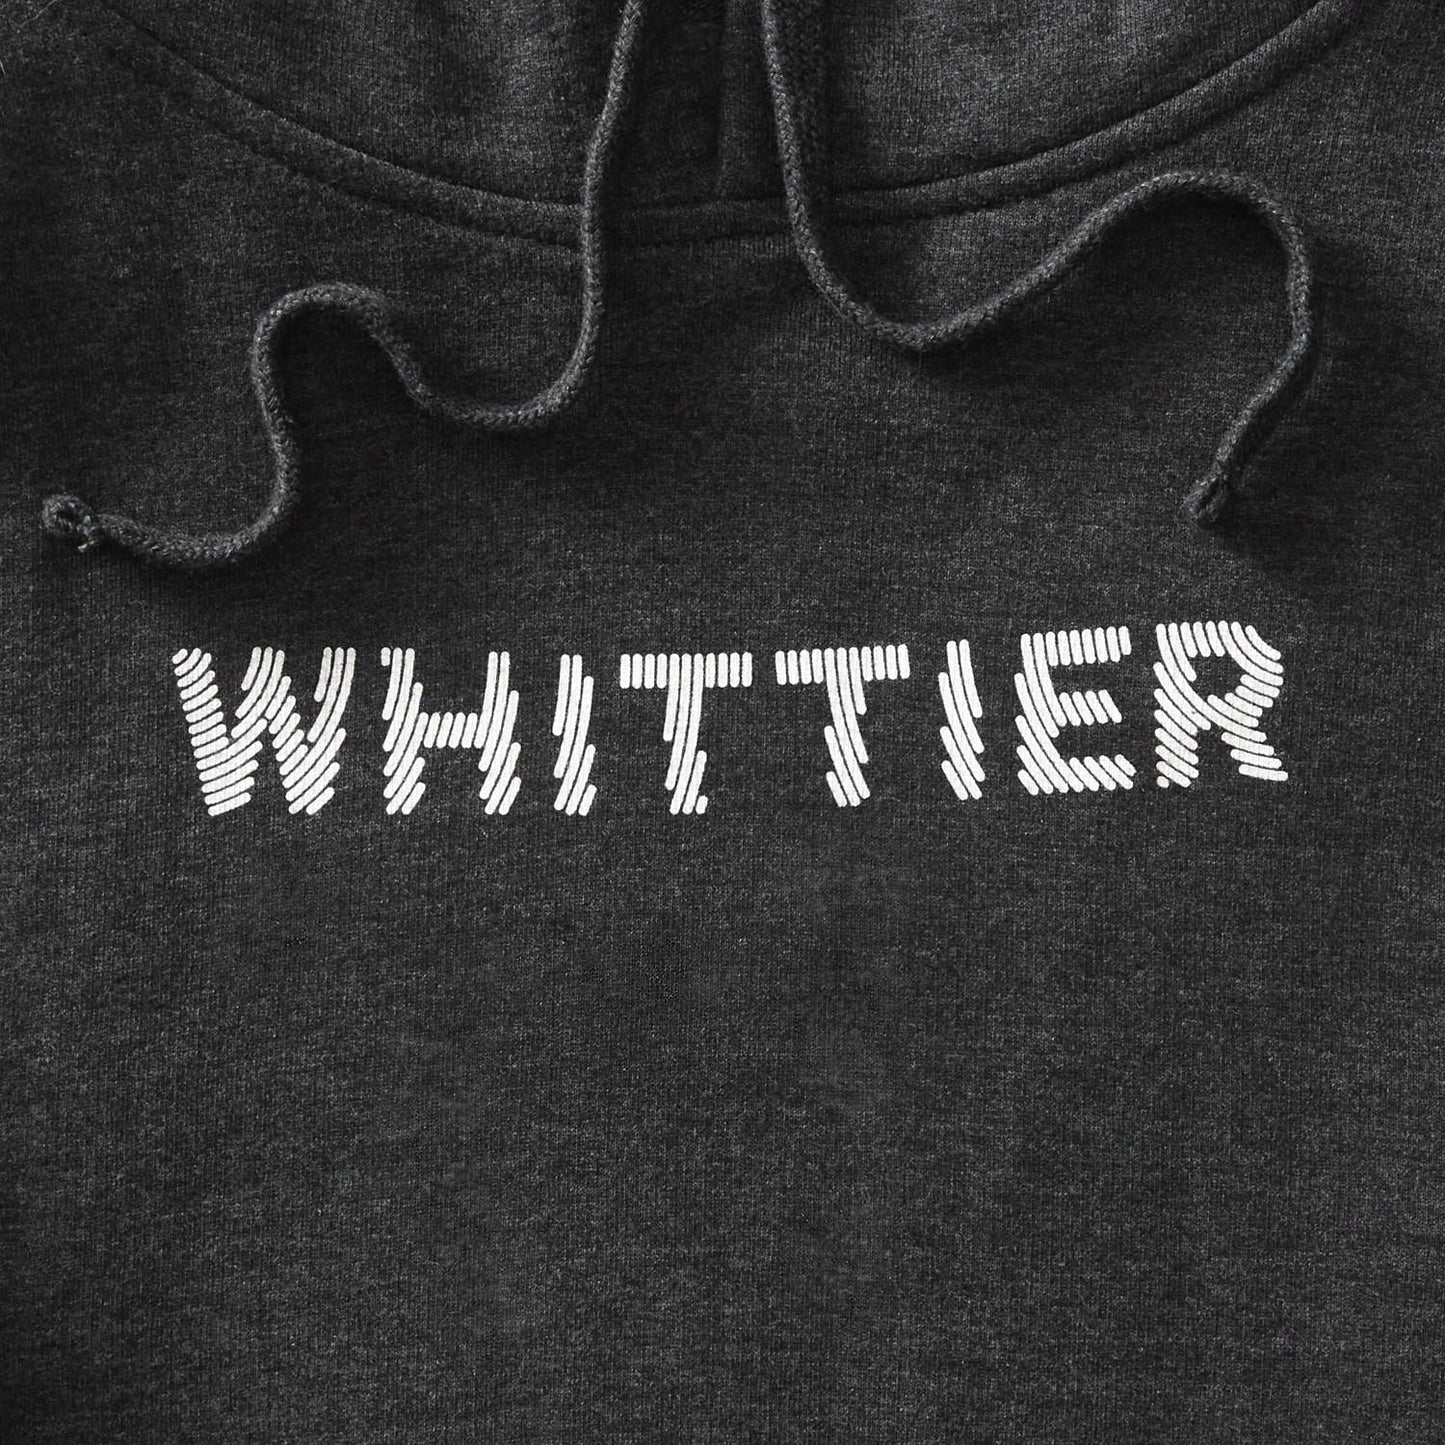 Details of charcoal heather pullover hoodie with Whittier text in white with line effect. minnesota clothing, minnesota apparel, minnesota accessories, minnesota gifts, minnesota goods, minnesota-themed clothing, minnesota-themed apparel, minnesota-themed gifts, minnesota-themed goods, twin cities clothing, twin cities apparel, twin cities accessories, minneapolis clothing, minneapolis apparel, twin cities neighborhoods, minneapolis neighborhoods